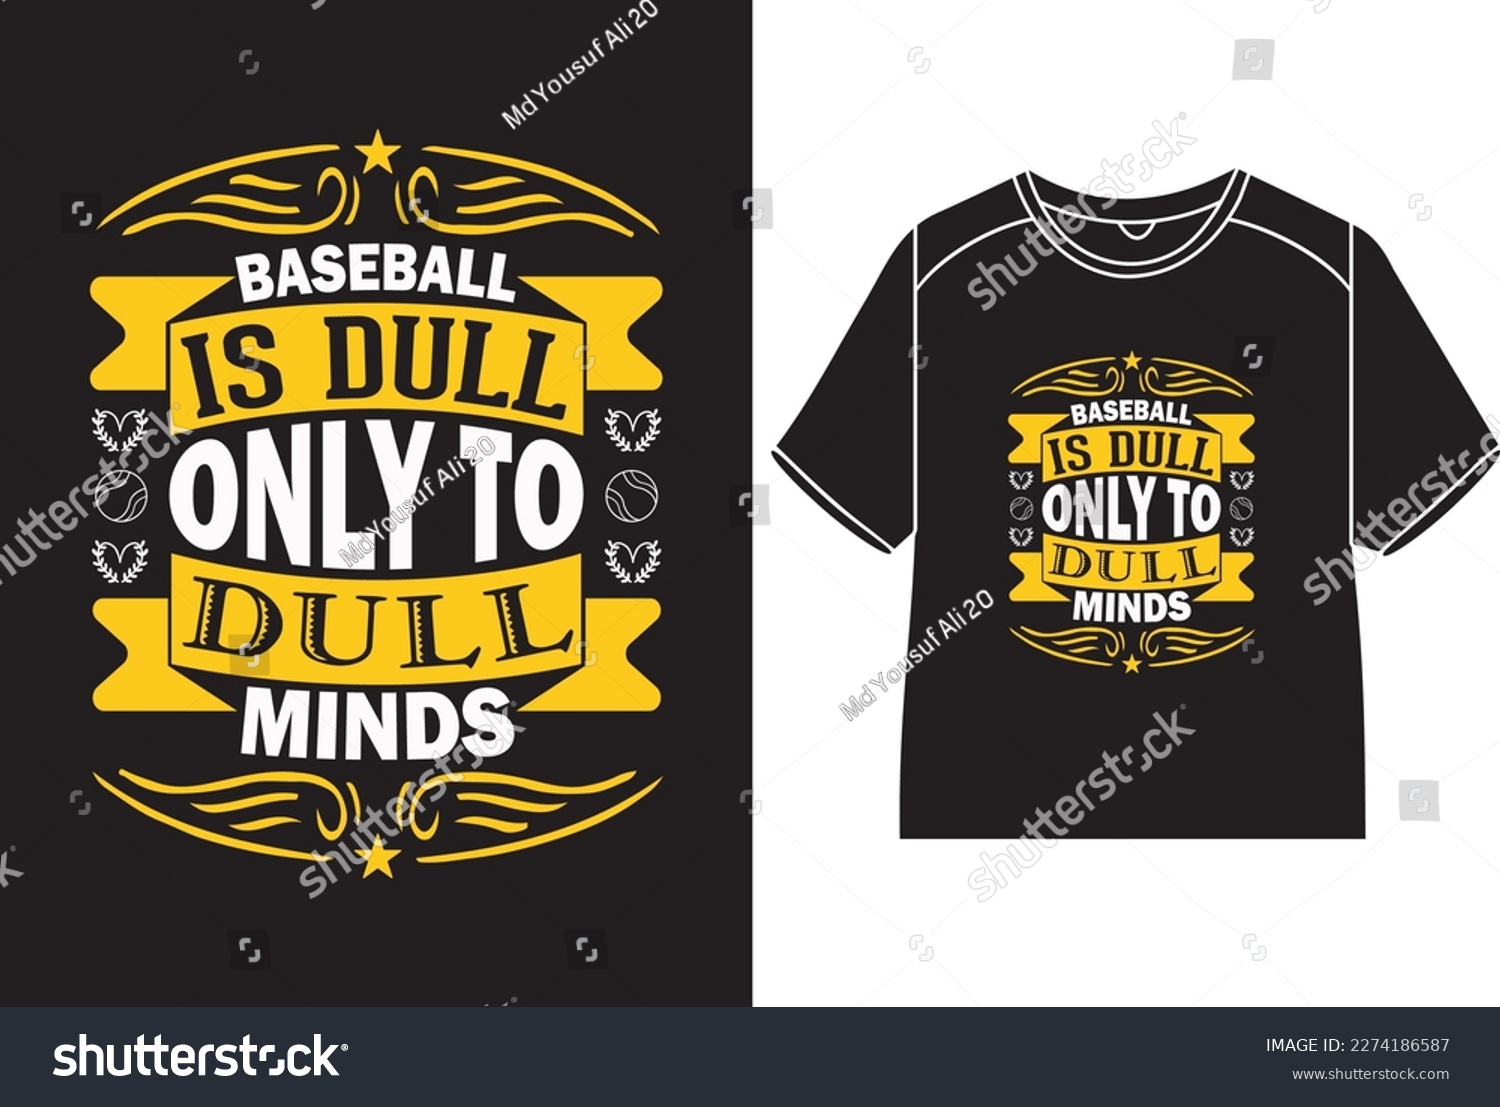 SVG of Baseball is dull only to dull minds T-Shirt Design svg